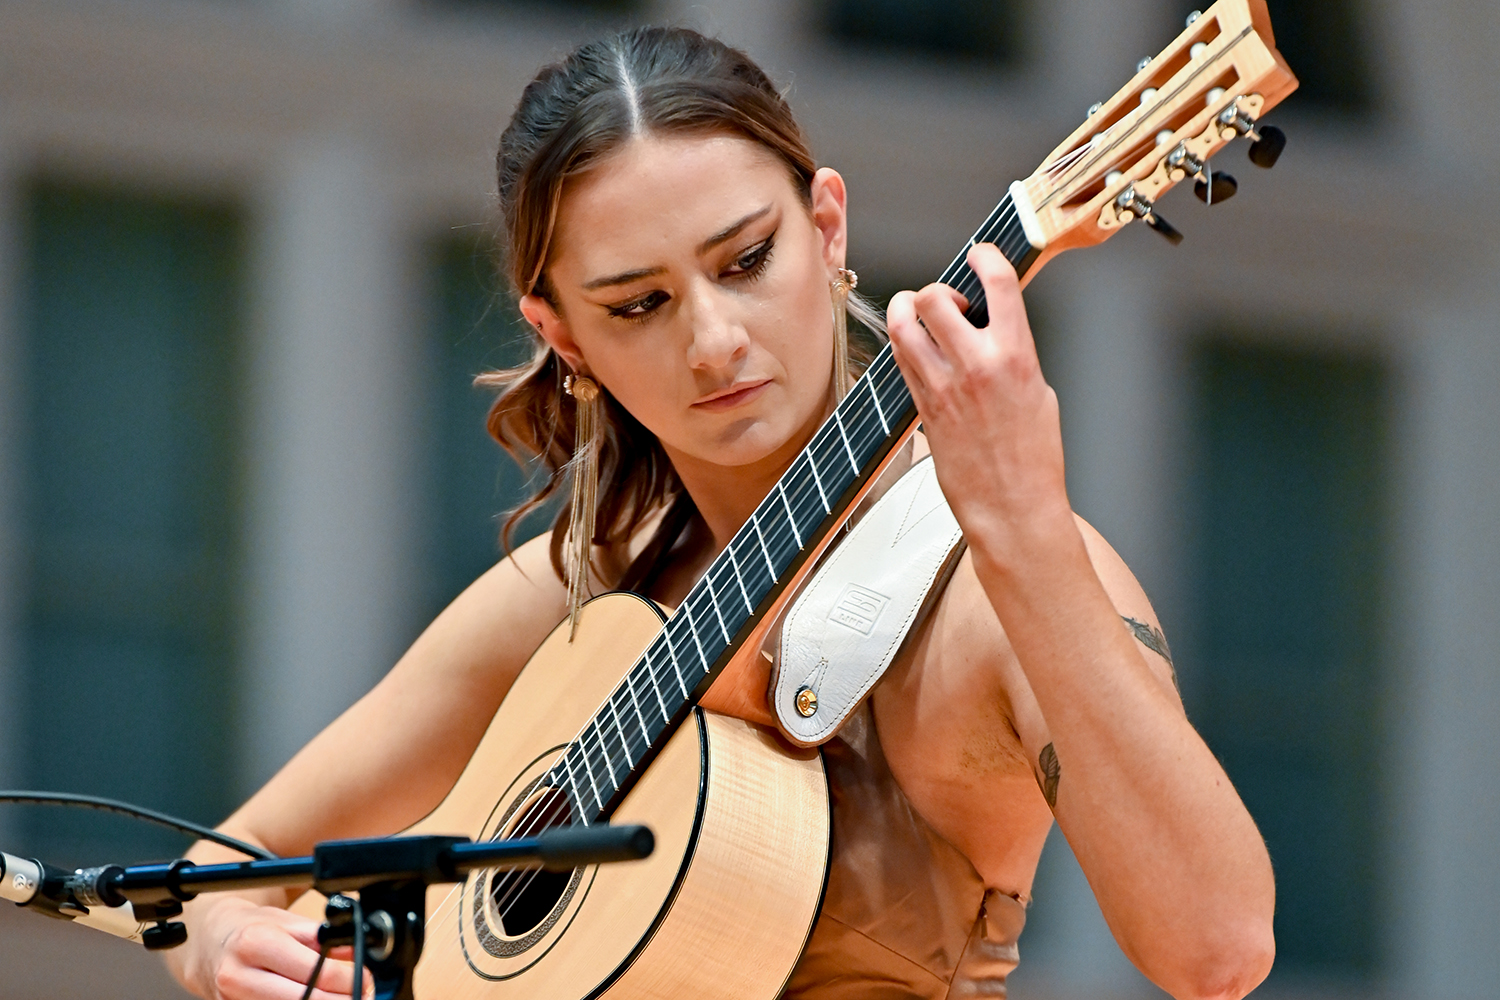 A woman playing classical guitar